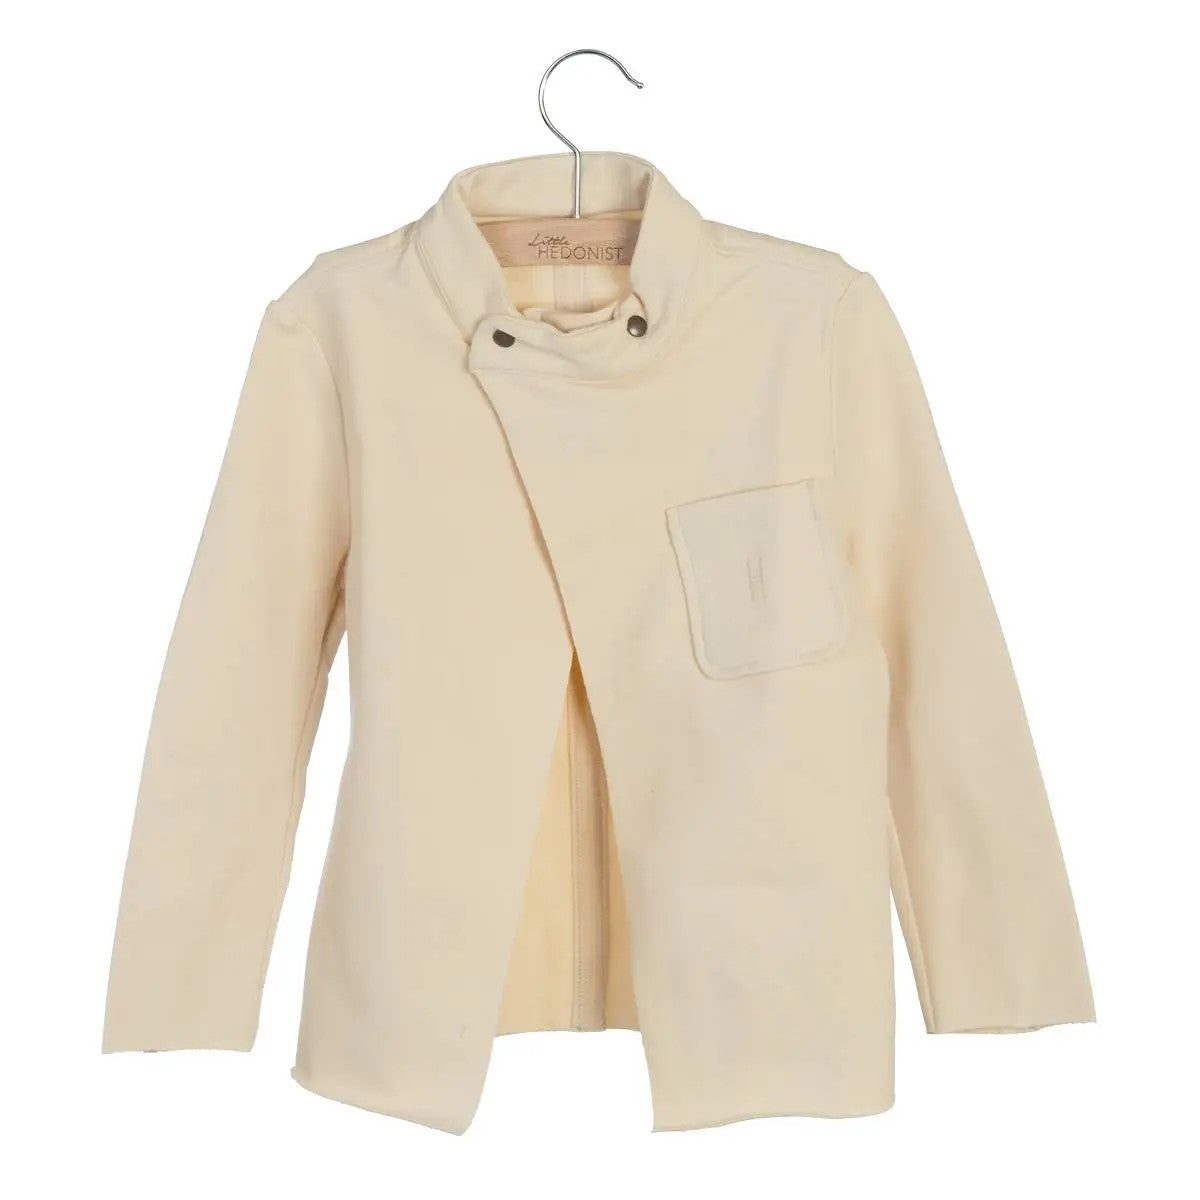 Little Hedonist off-season organic jacket with chic push-button wrap closure in Light Beige